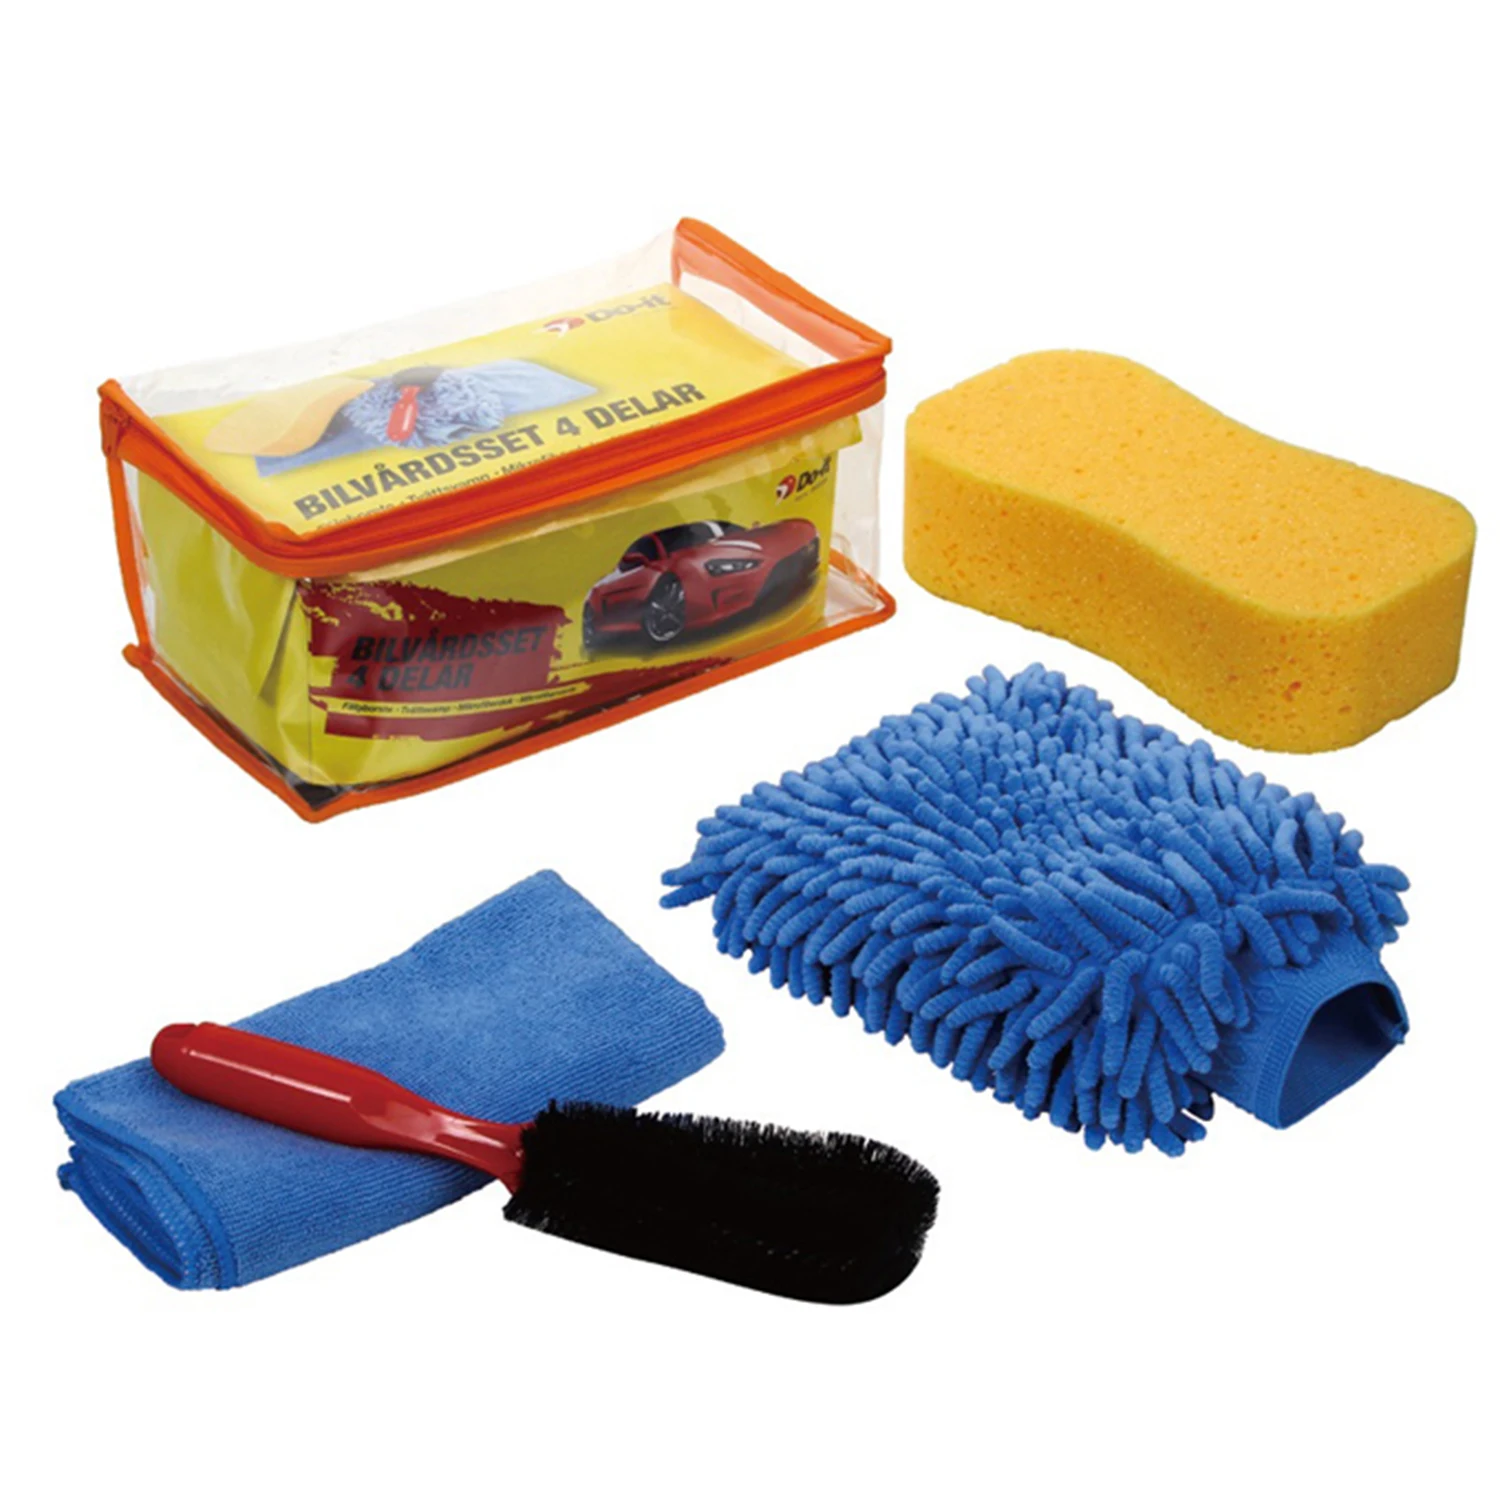 Microfiber car cleaning towel, with chenille mitt car cleaning kit